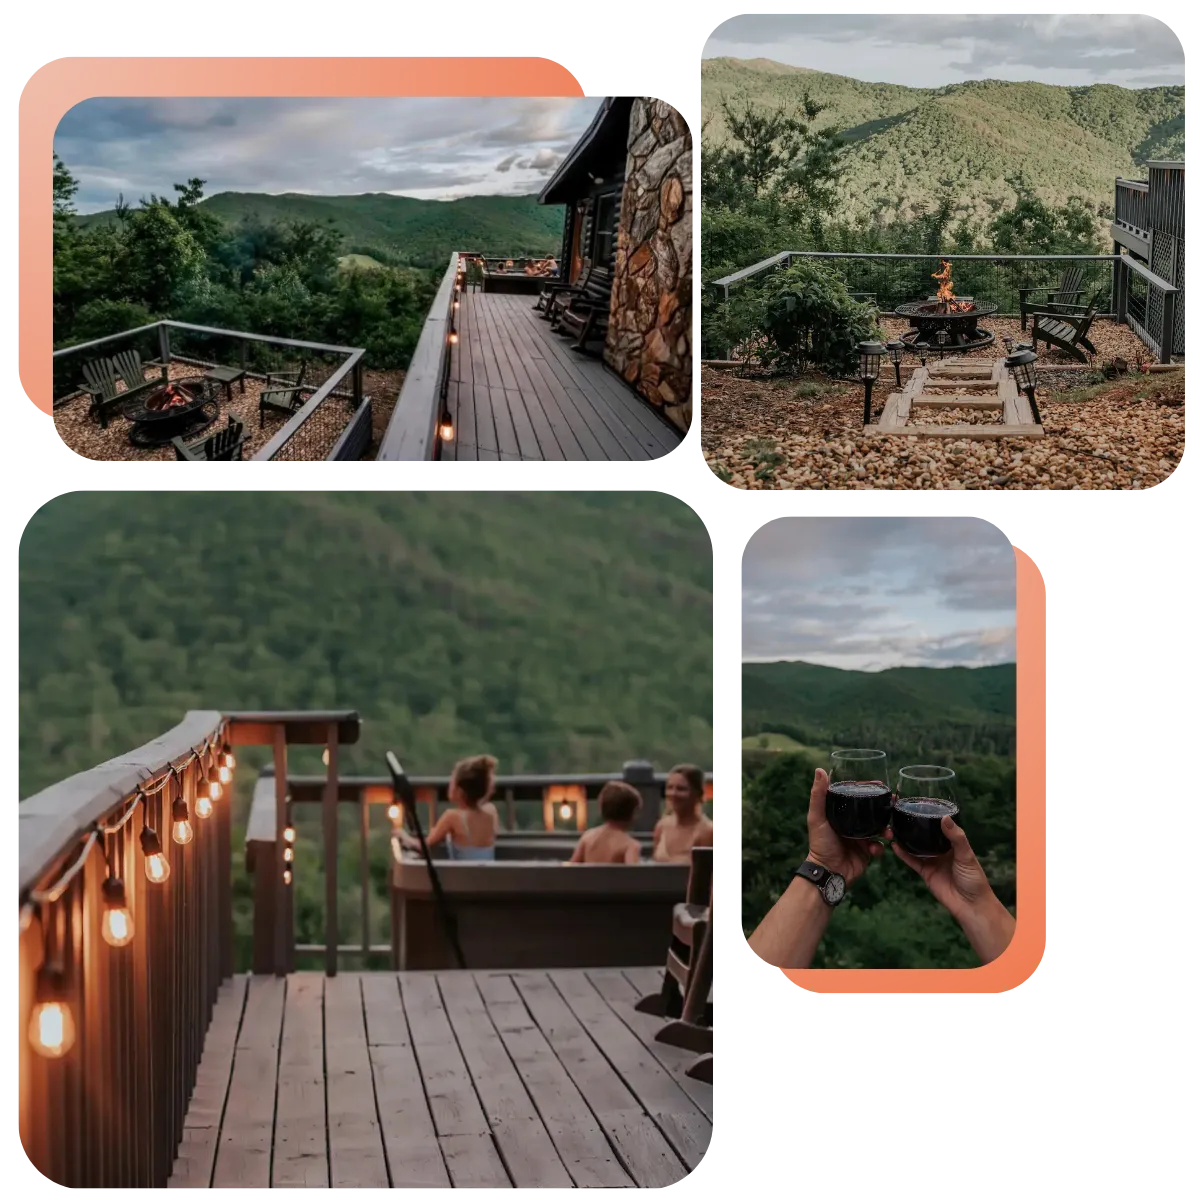 At Harris Hideaways, we specialize in creating unforgettable getaways, blending nature, comfort, and adventure in our unique properties. Mountain Top Retreat lets you relax in the peaceful Blue Ridge Mountains, with modern comforts and beautiful scenery perfect for exploring or extending your mountain stay.